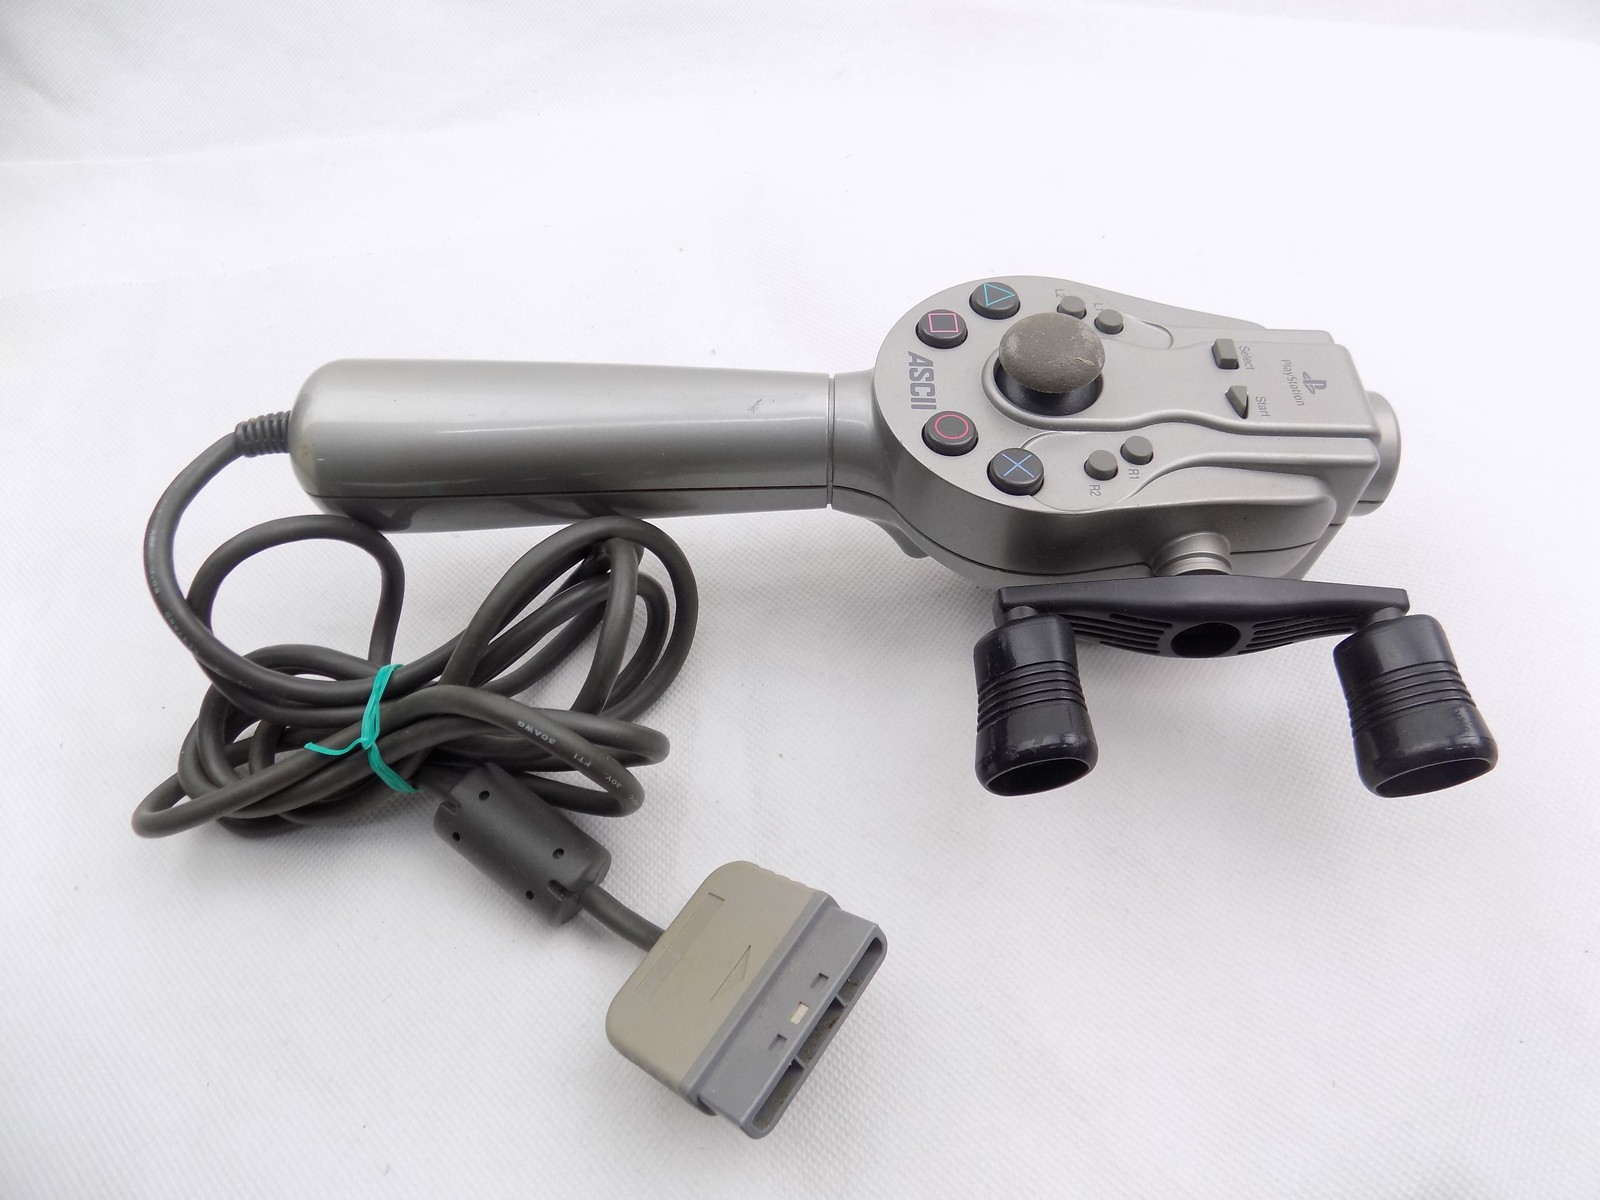 Boxed Playstation 1 Ps1 Ascii Fishing Rod Controller – Tested